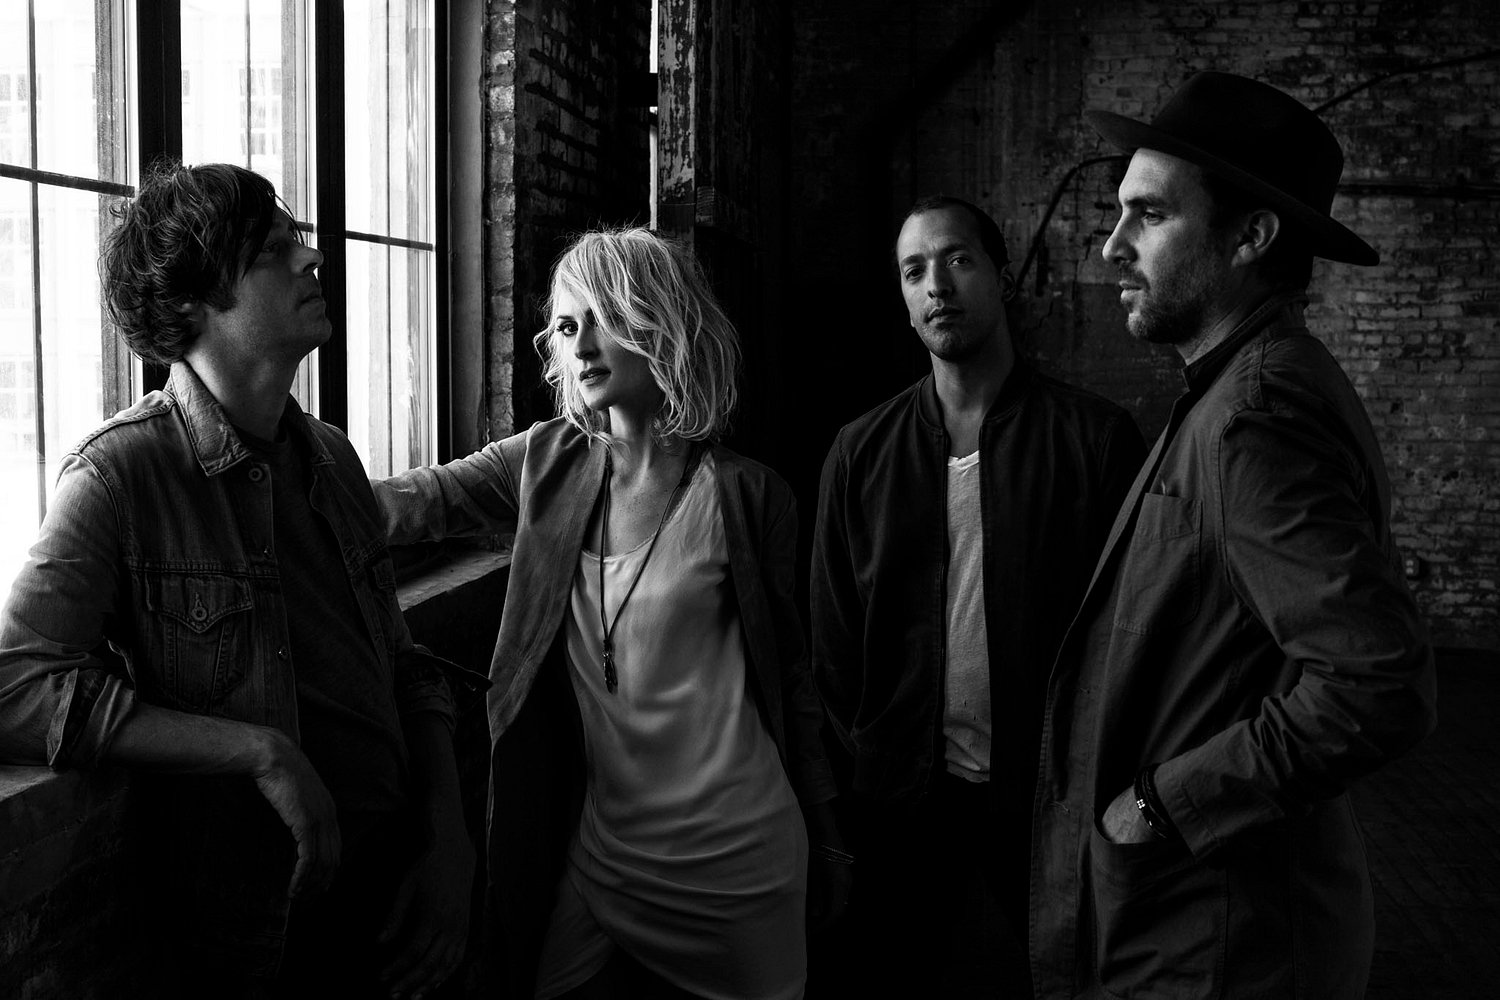 Metric: “In a mainstream world, we’re completely weird”